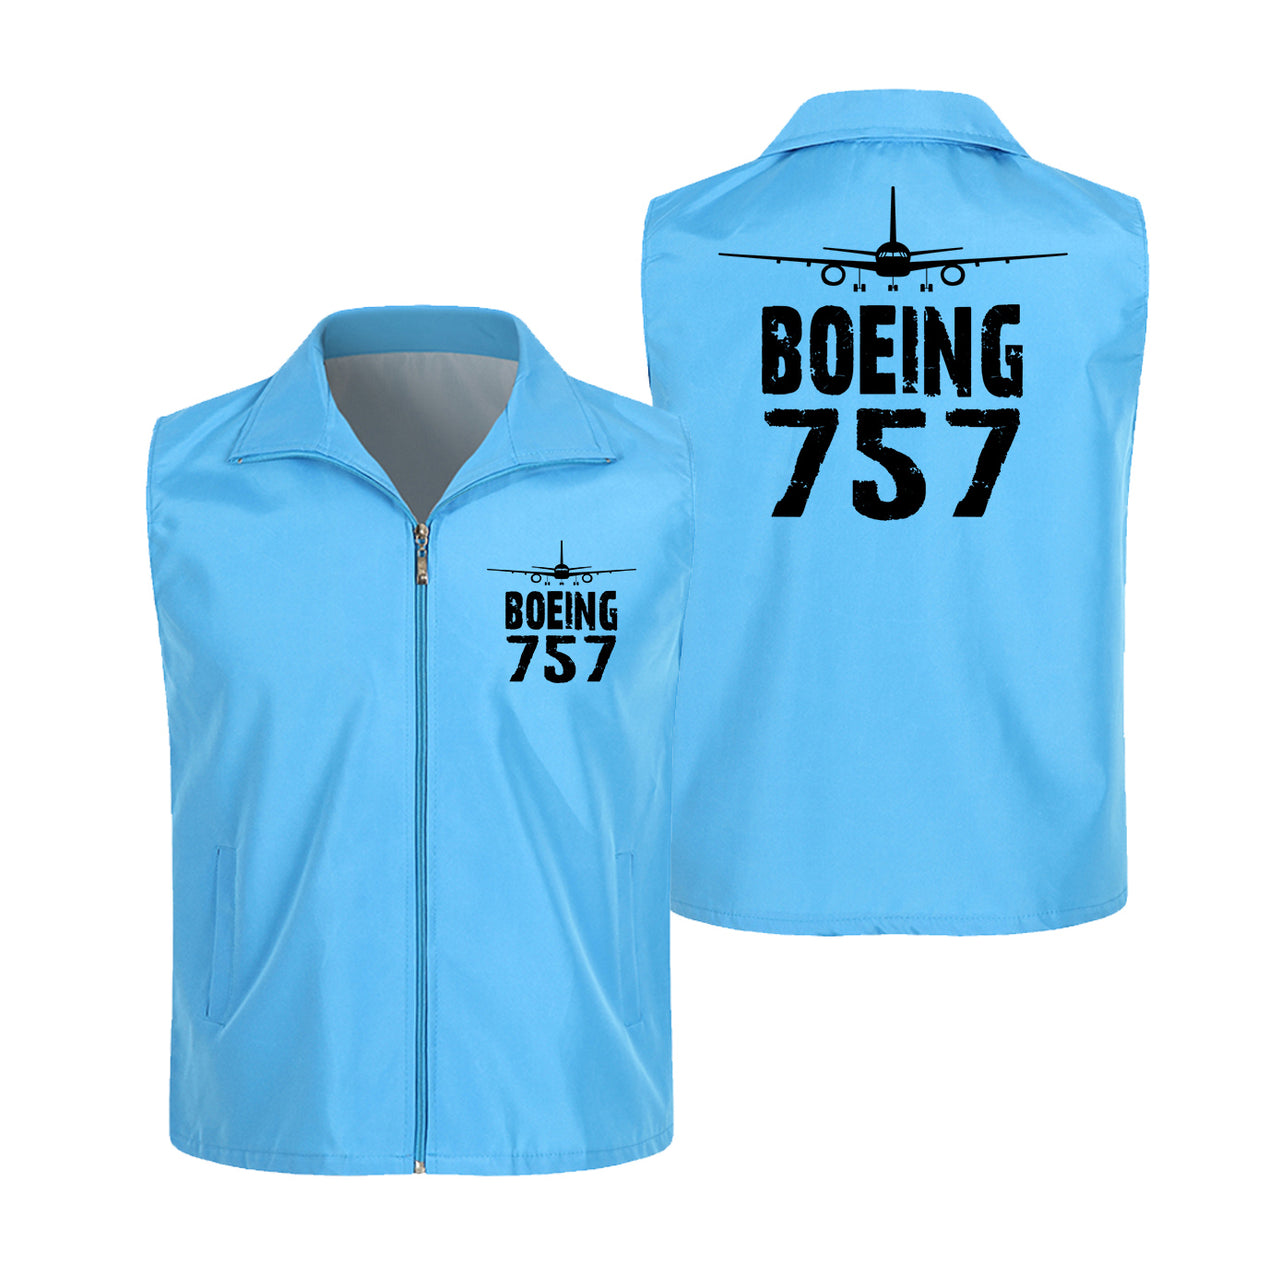 Boeing 757 & Plane Designed Thin Style Vests